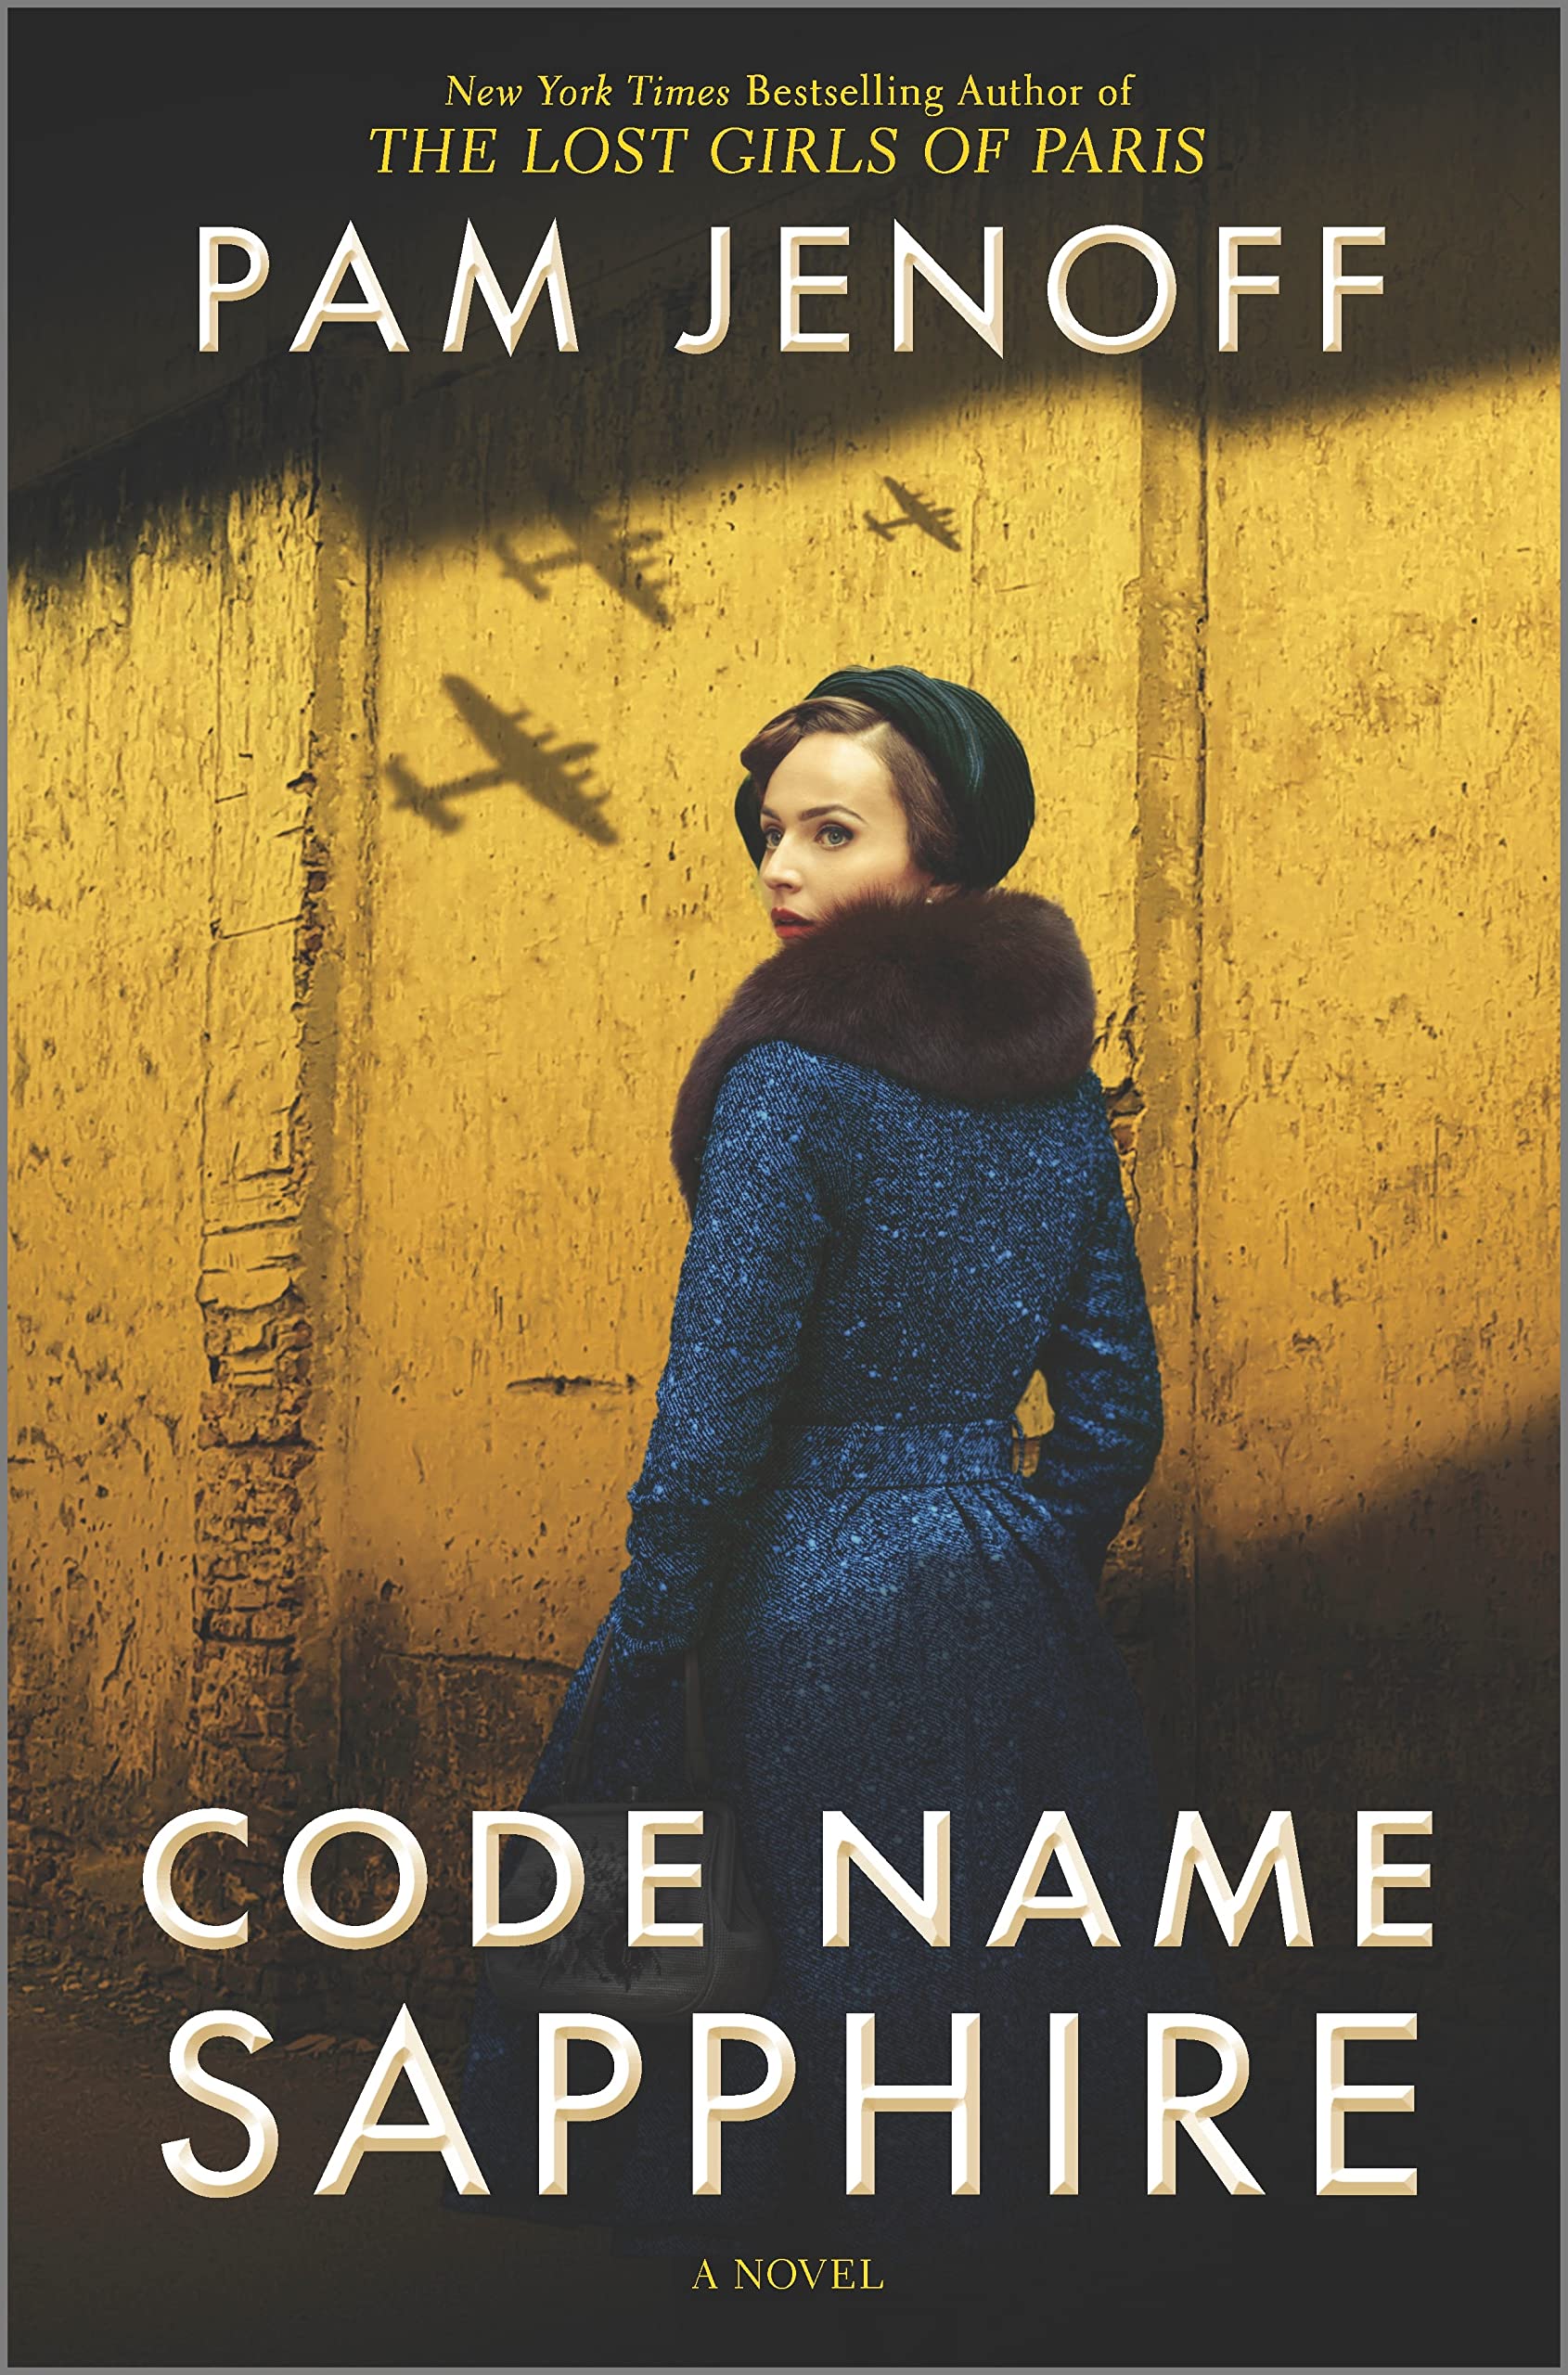 Image for "Code Name Sapphire"